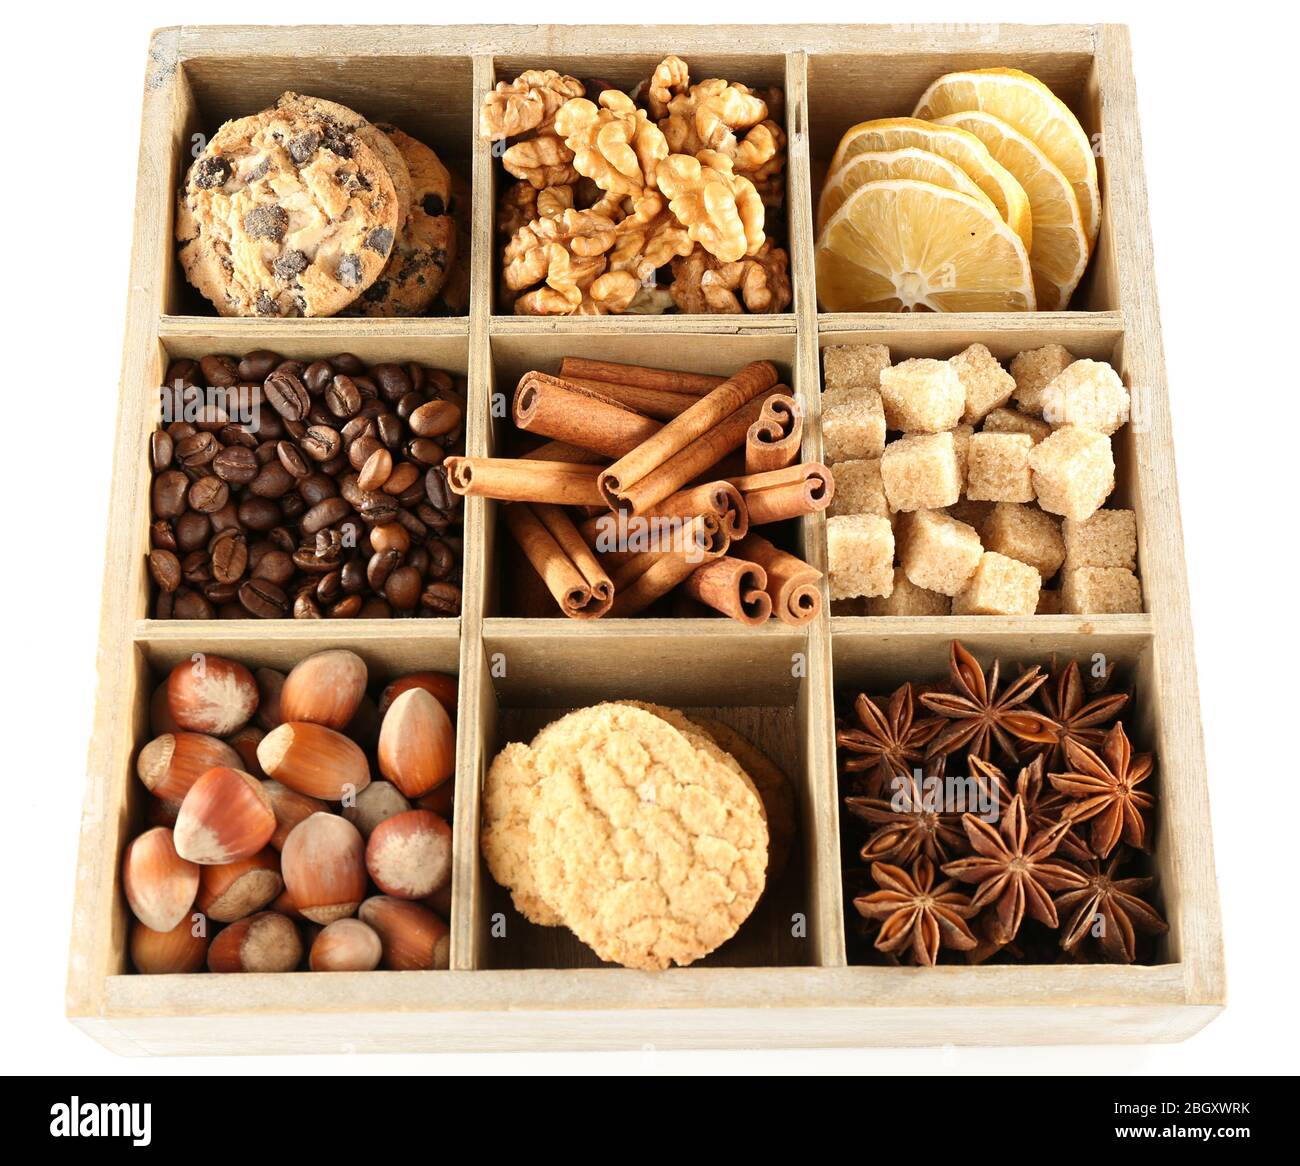 Square box with cookies, nuts and spices isolated on white Stock Photo